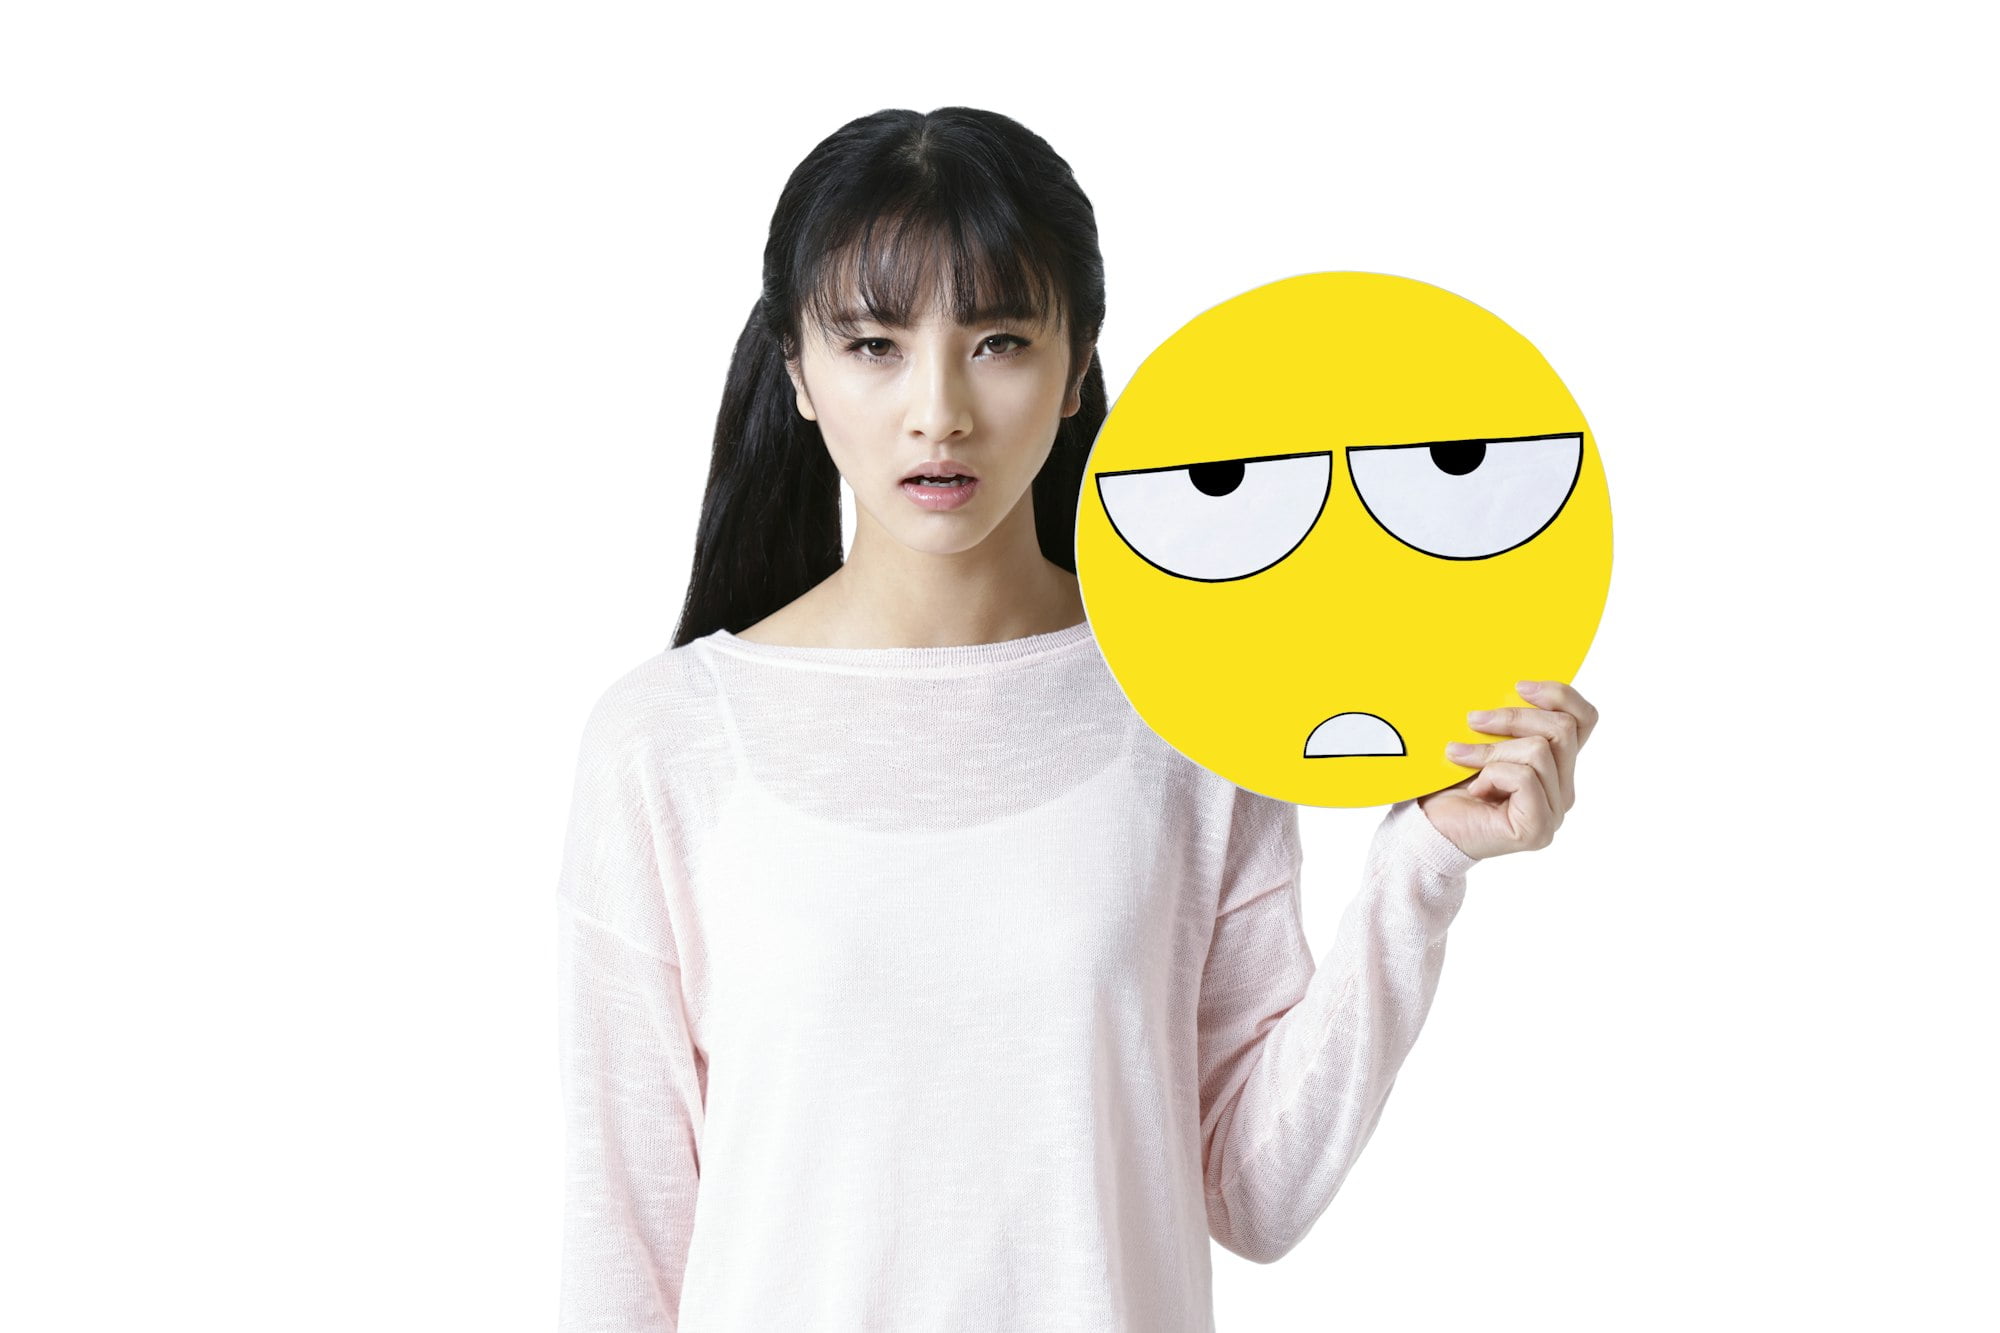 Young woman holding a tired emoticon face